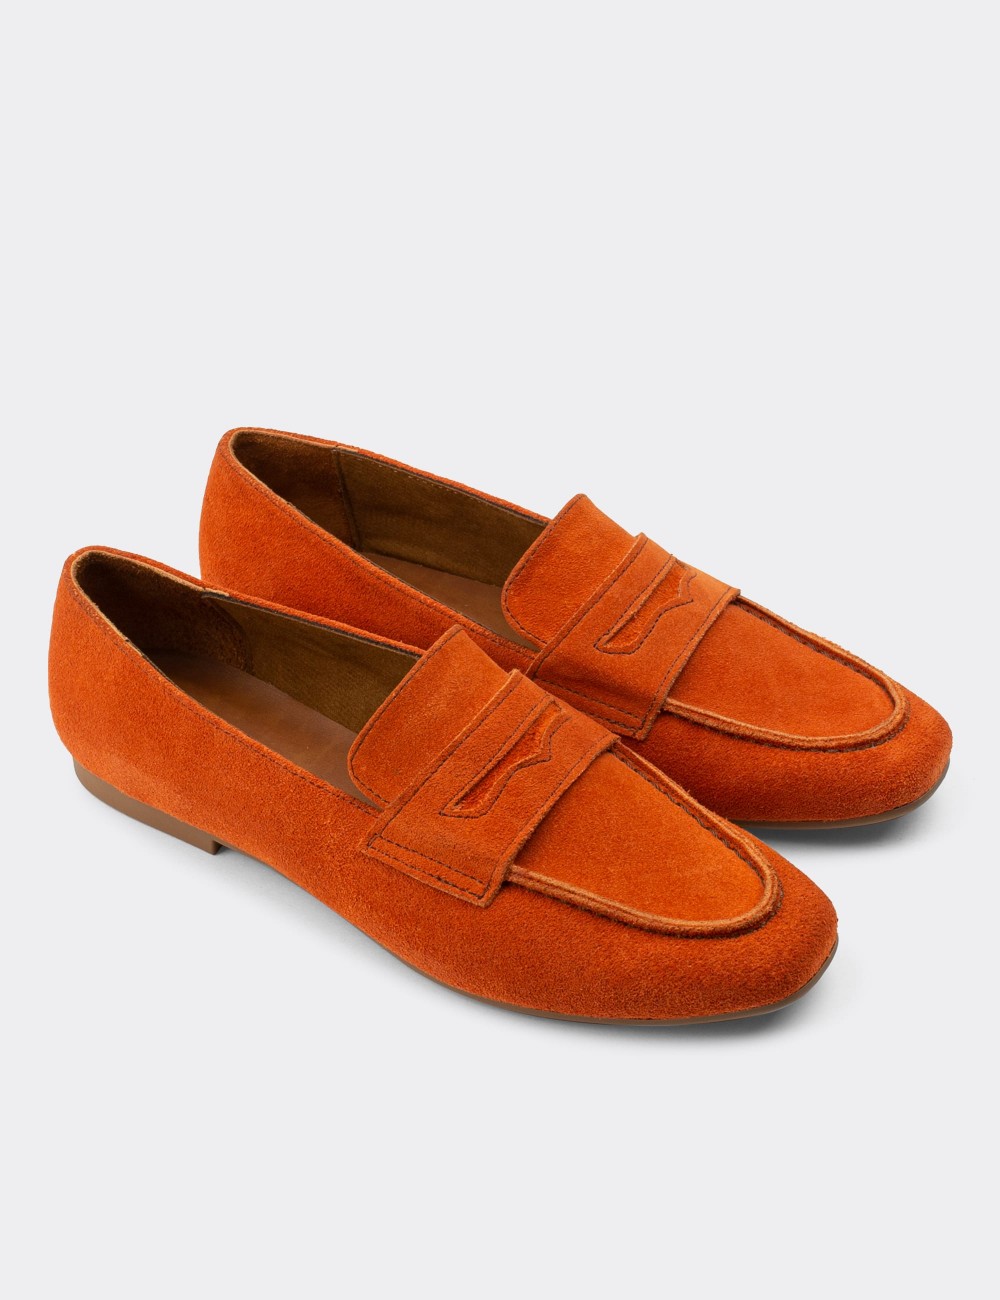 Orange Suede Leather Loafers - 01914ZTRCC01